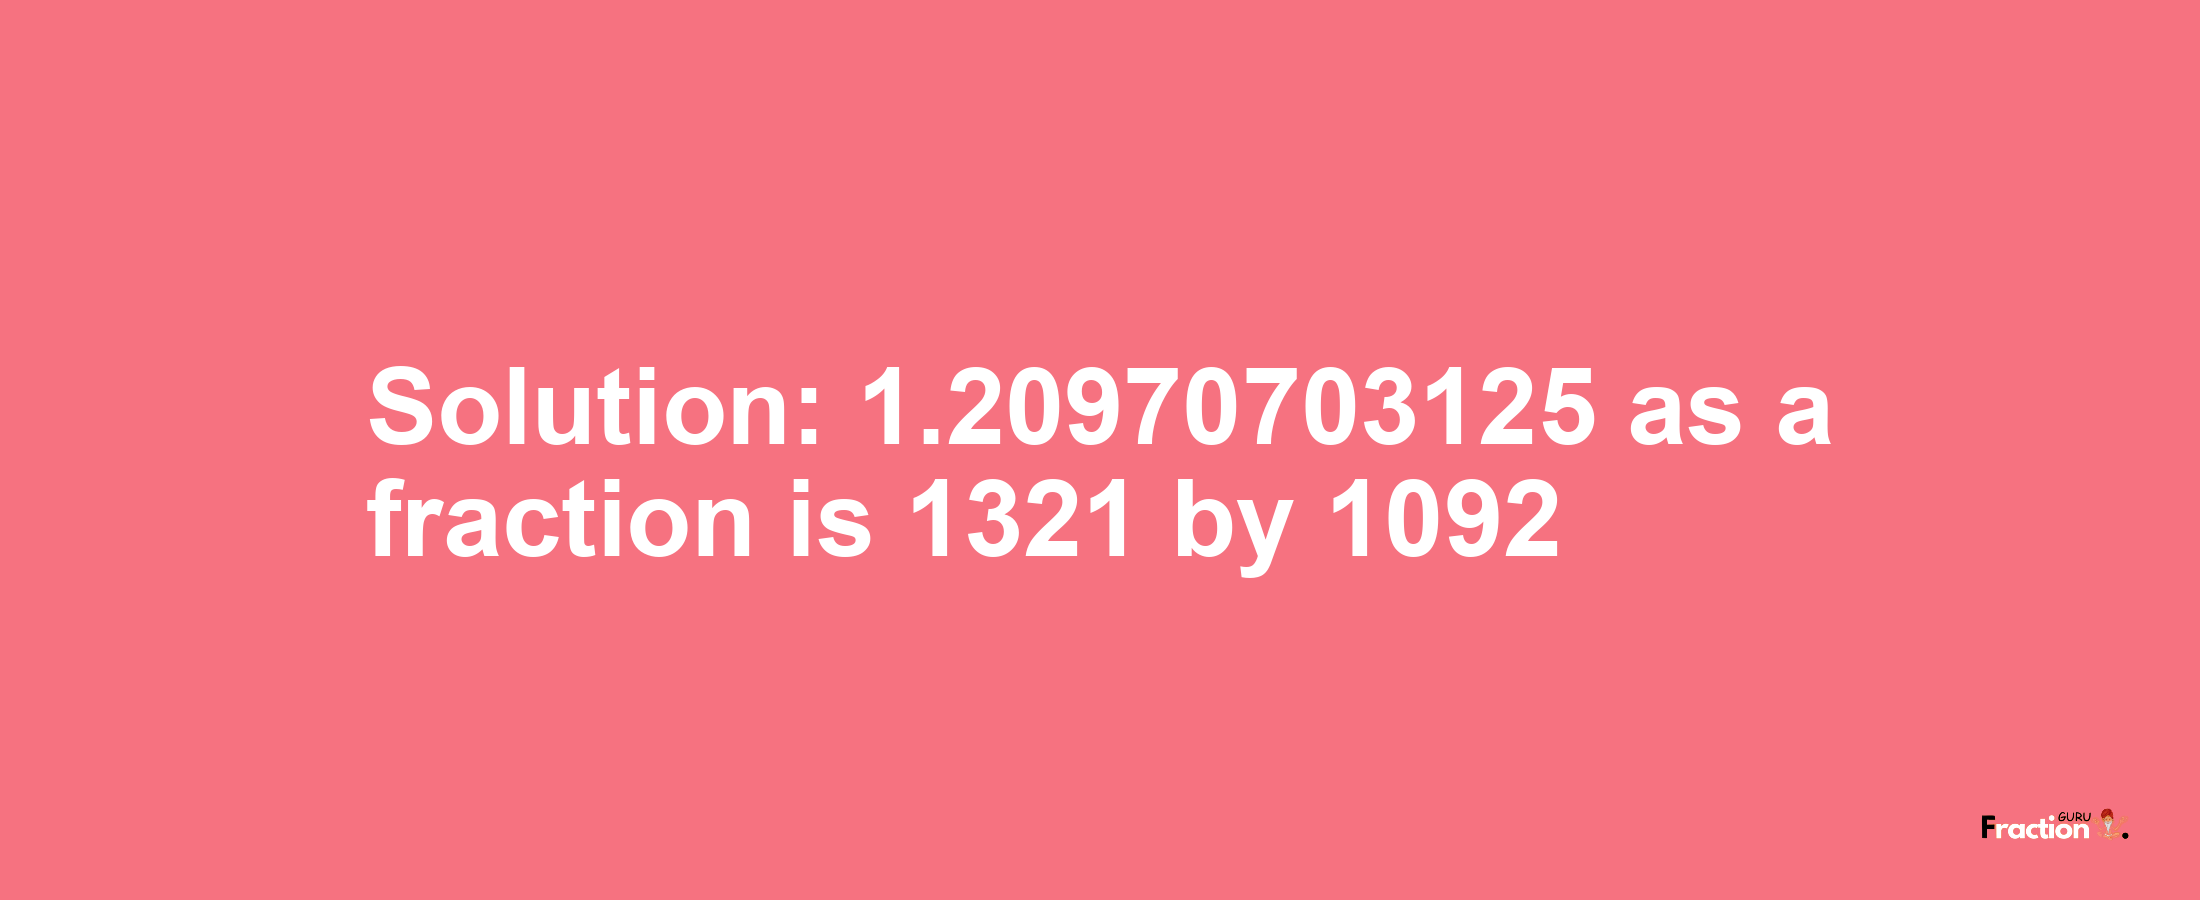 Solution:1.20970703125 as a fraction is 1321/1092